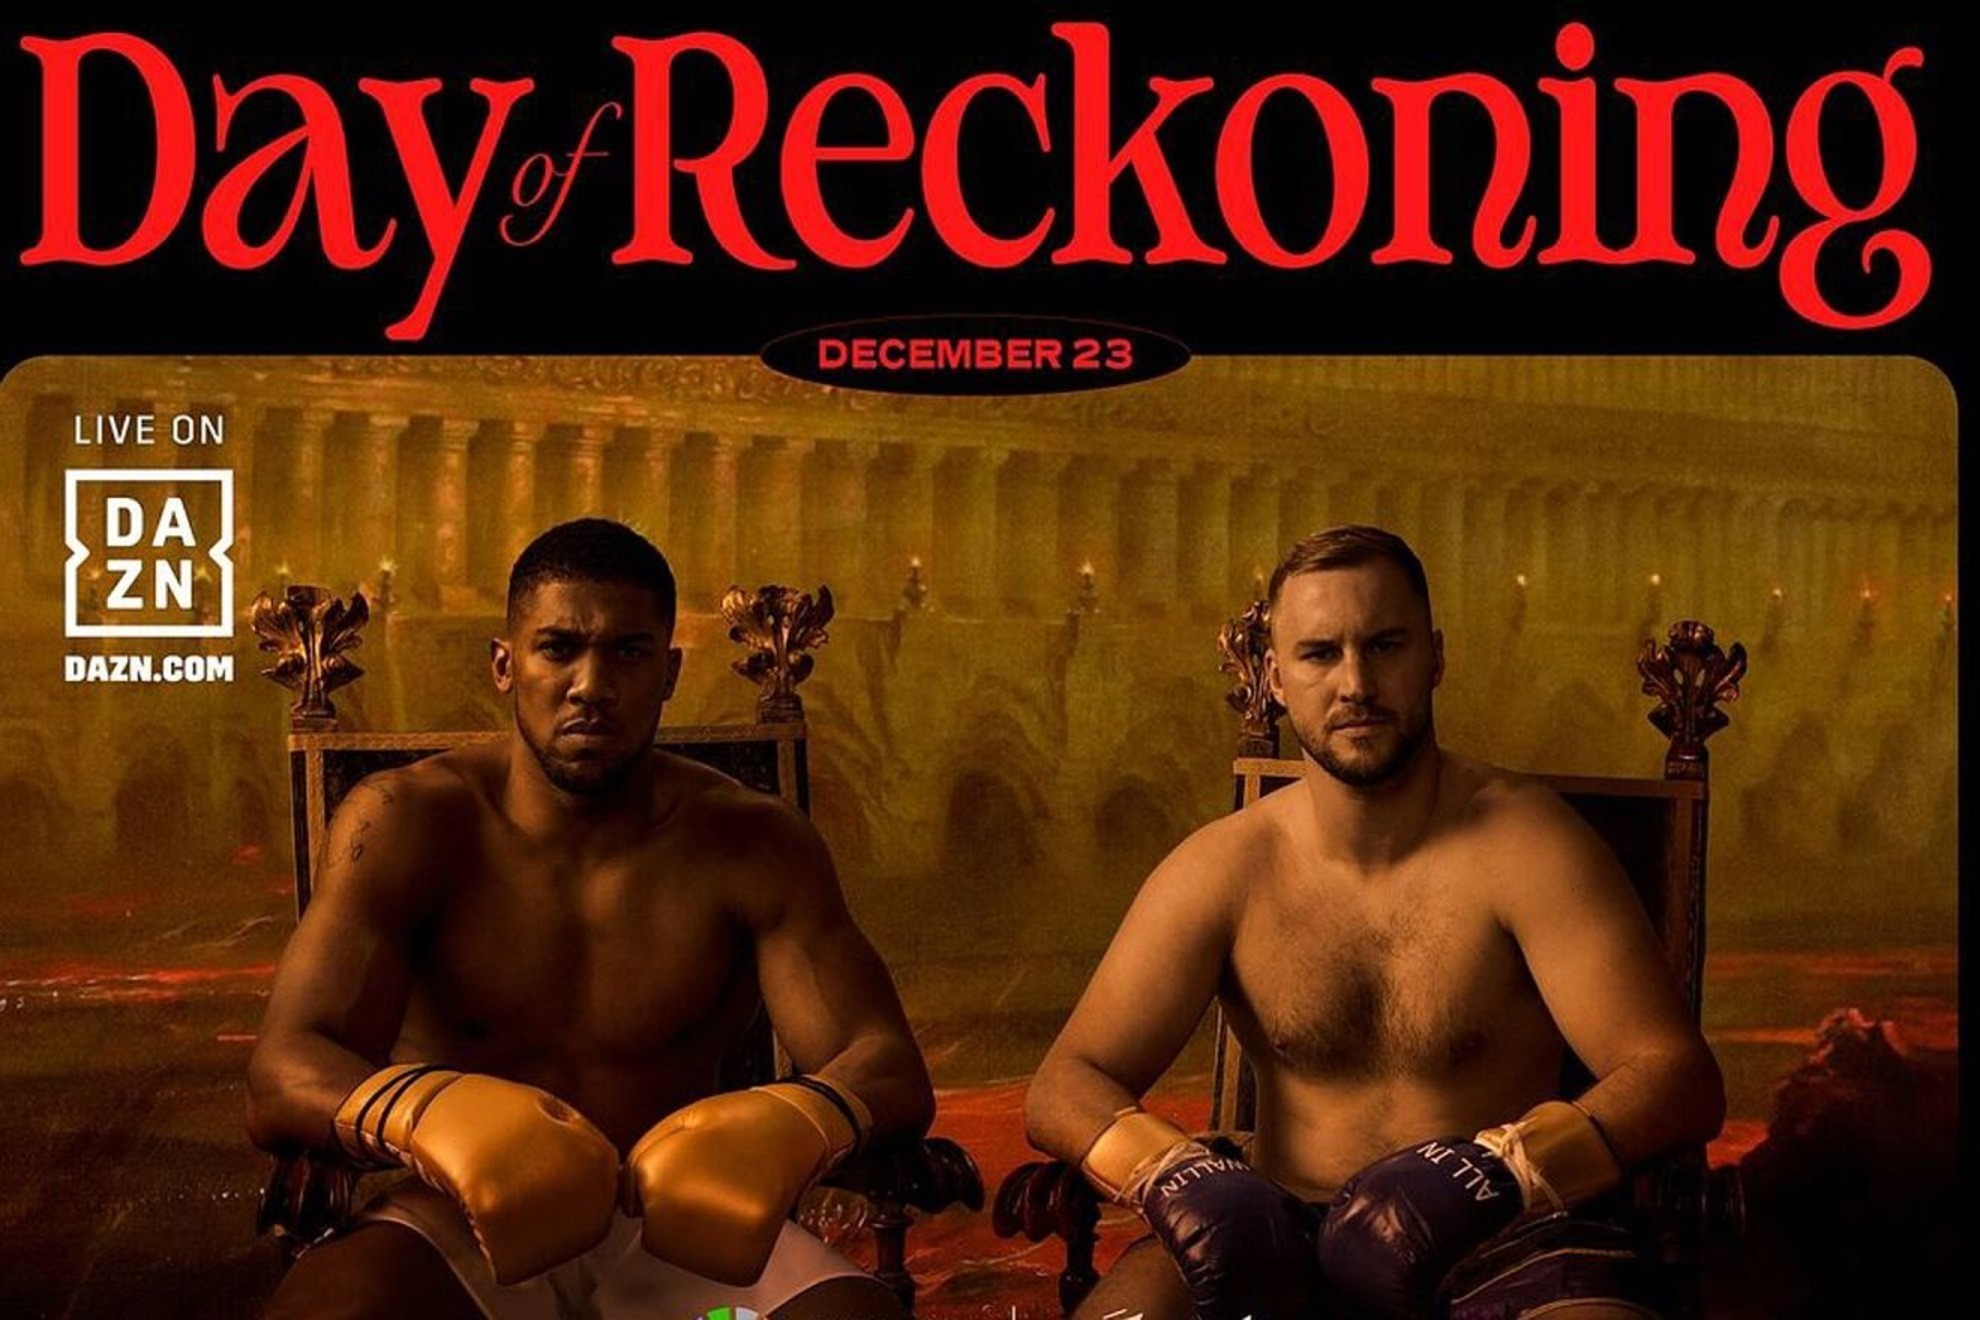 Day of Reckoning Boxing Card: Anthony Joshua, Deontay Wilder, Dmitry Bivol and all fights to watch